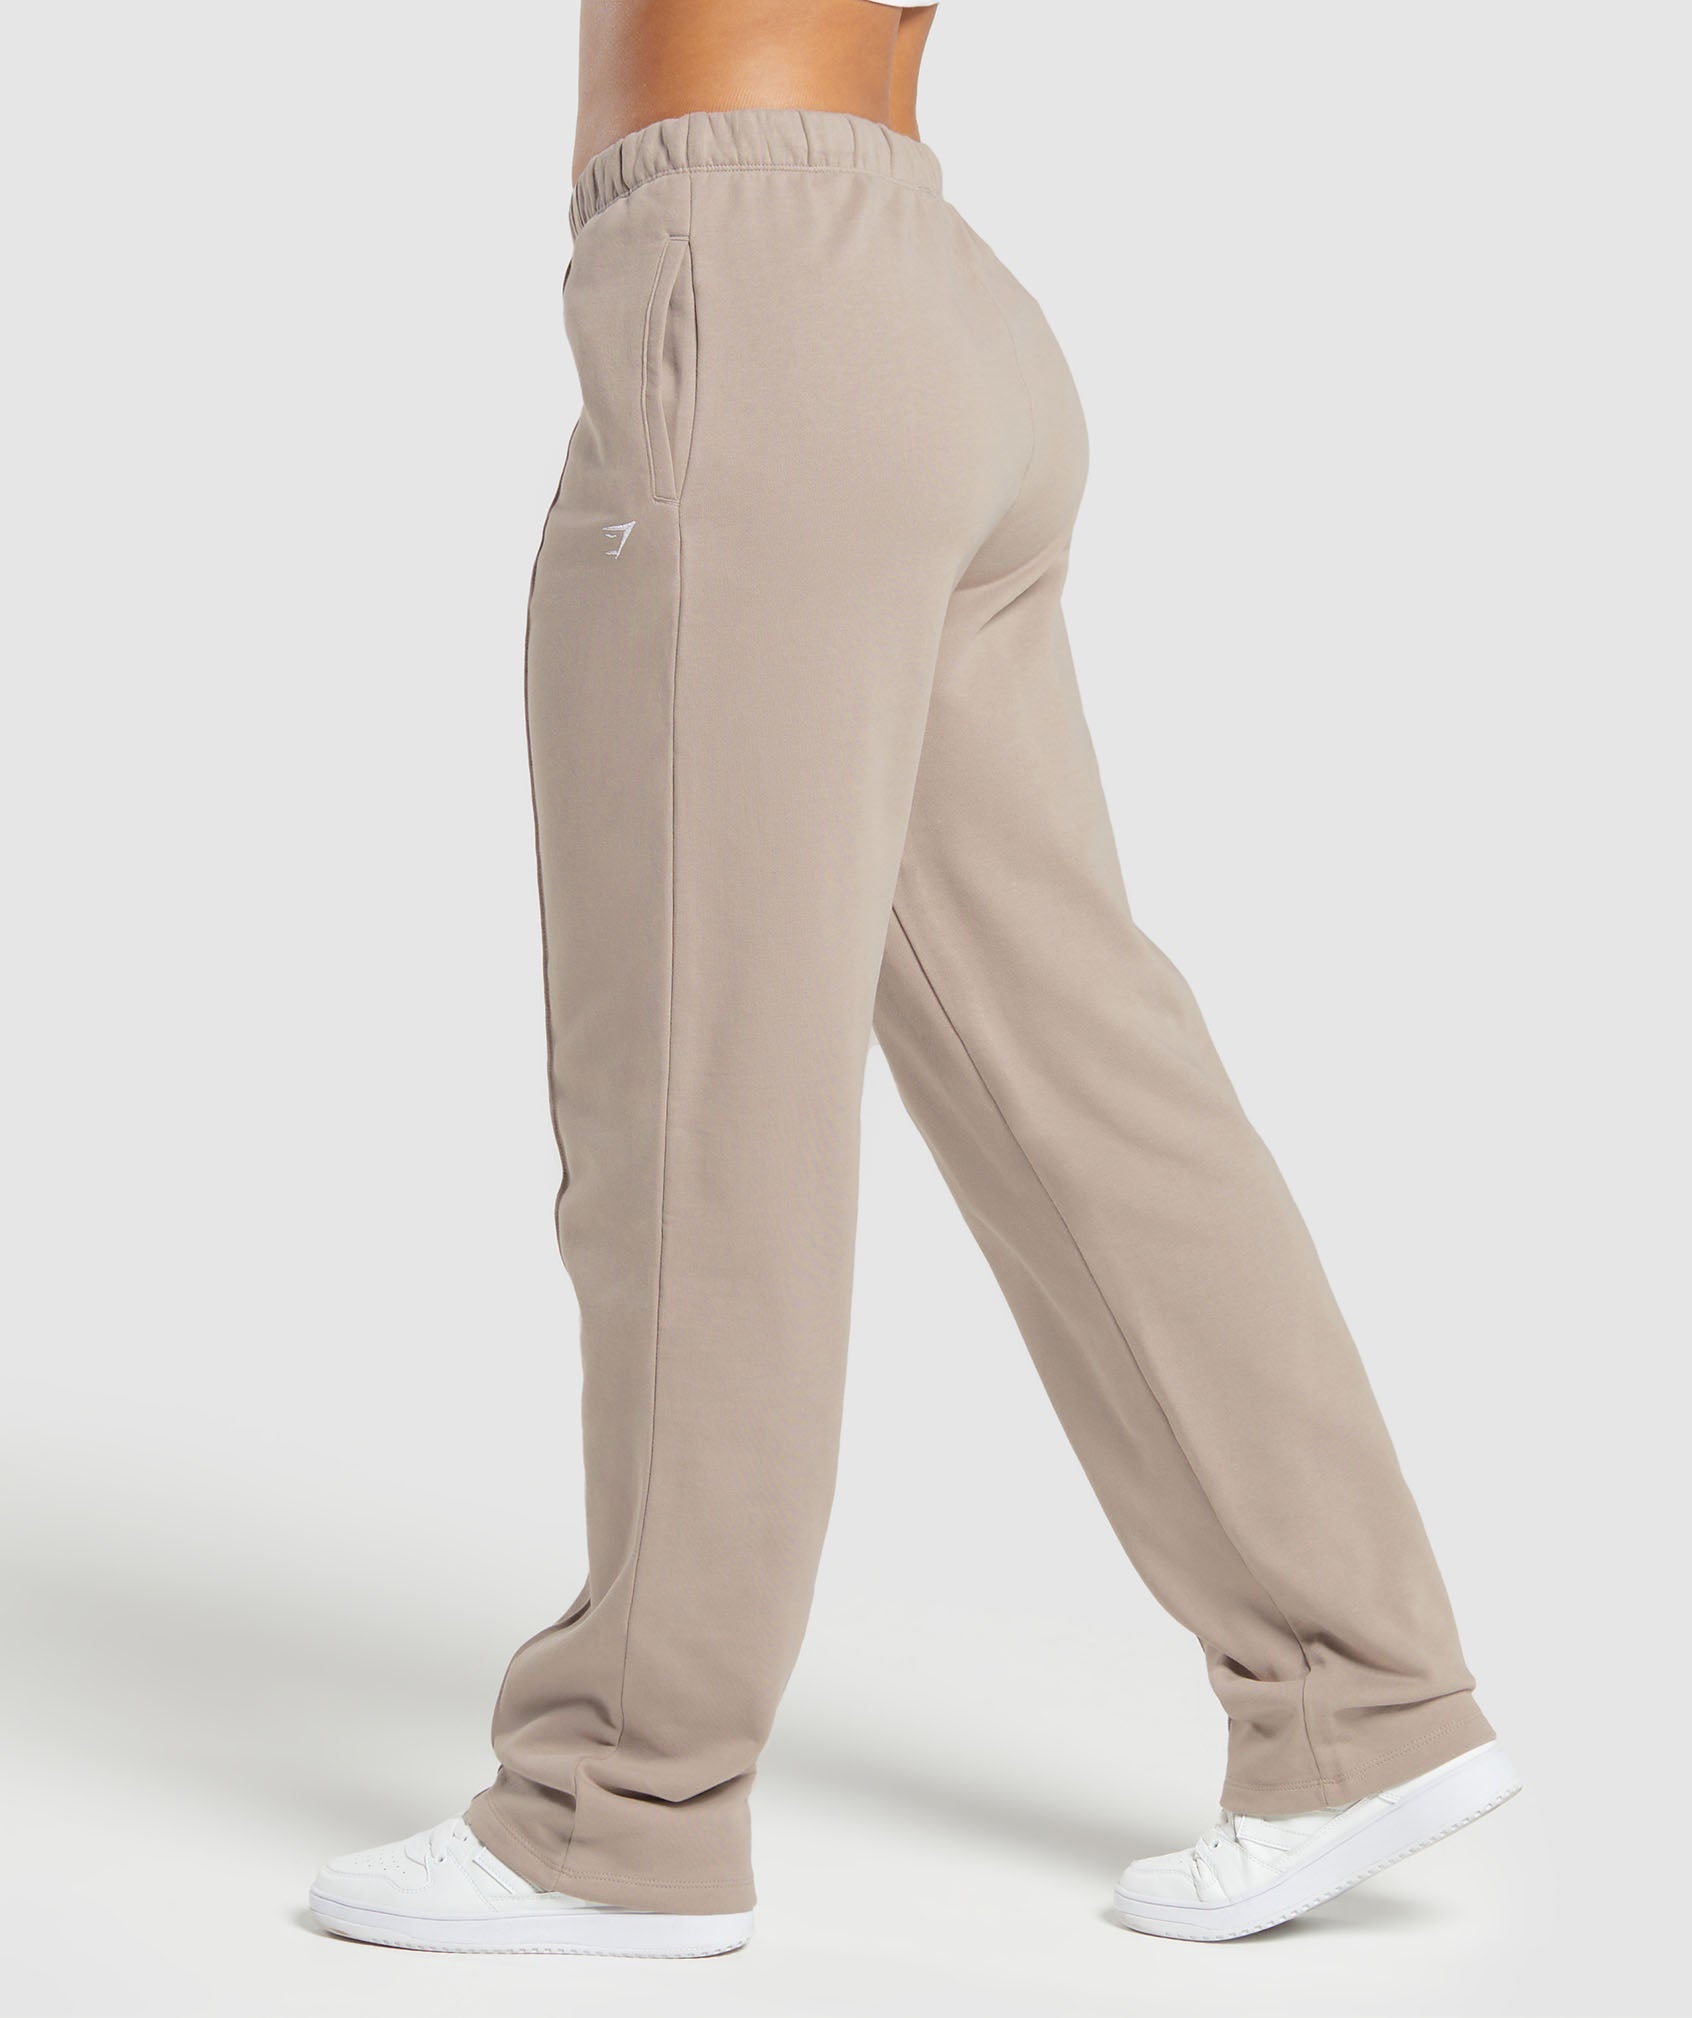 Gymshark Joggers On Clearance - Womens GS Power Light Pink